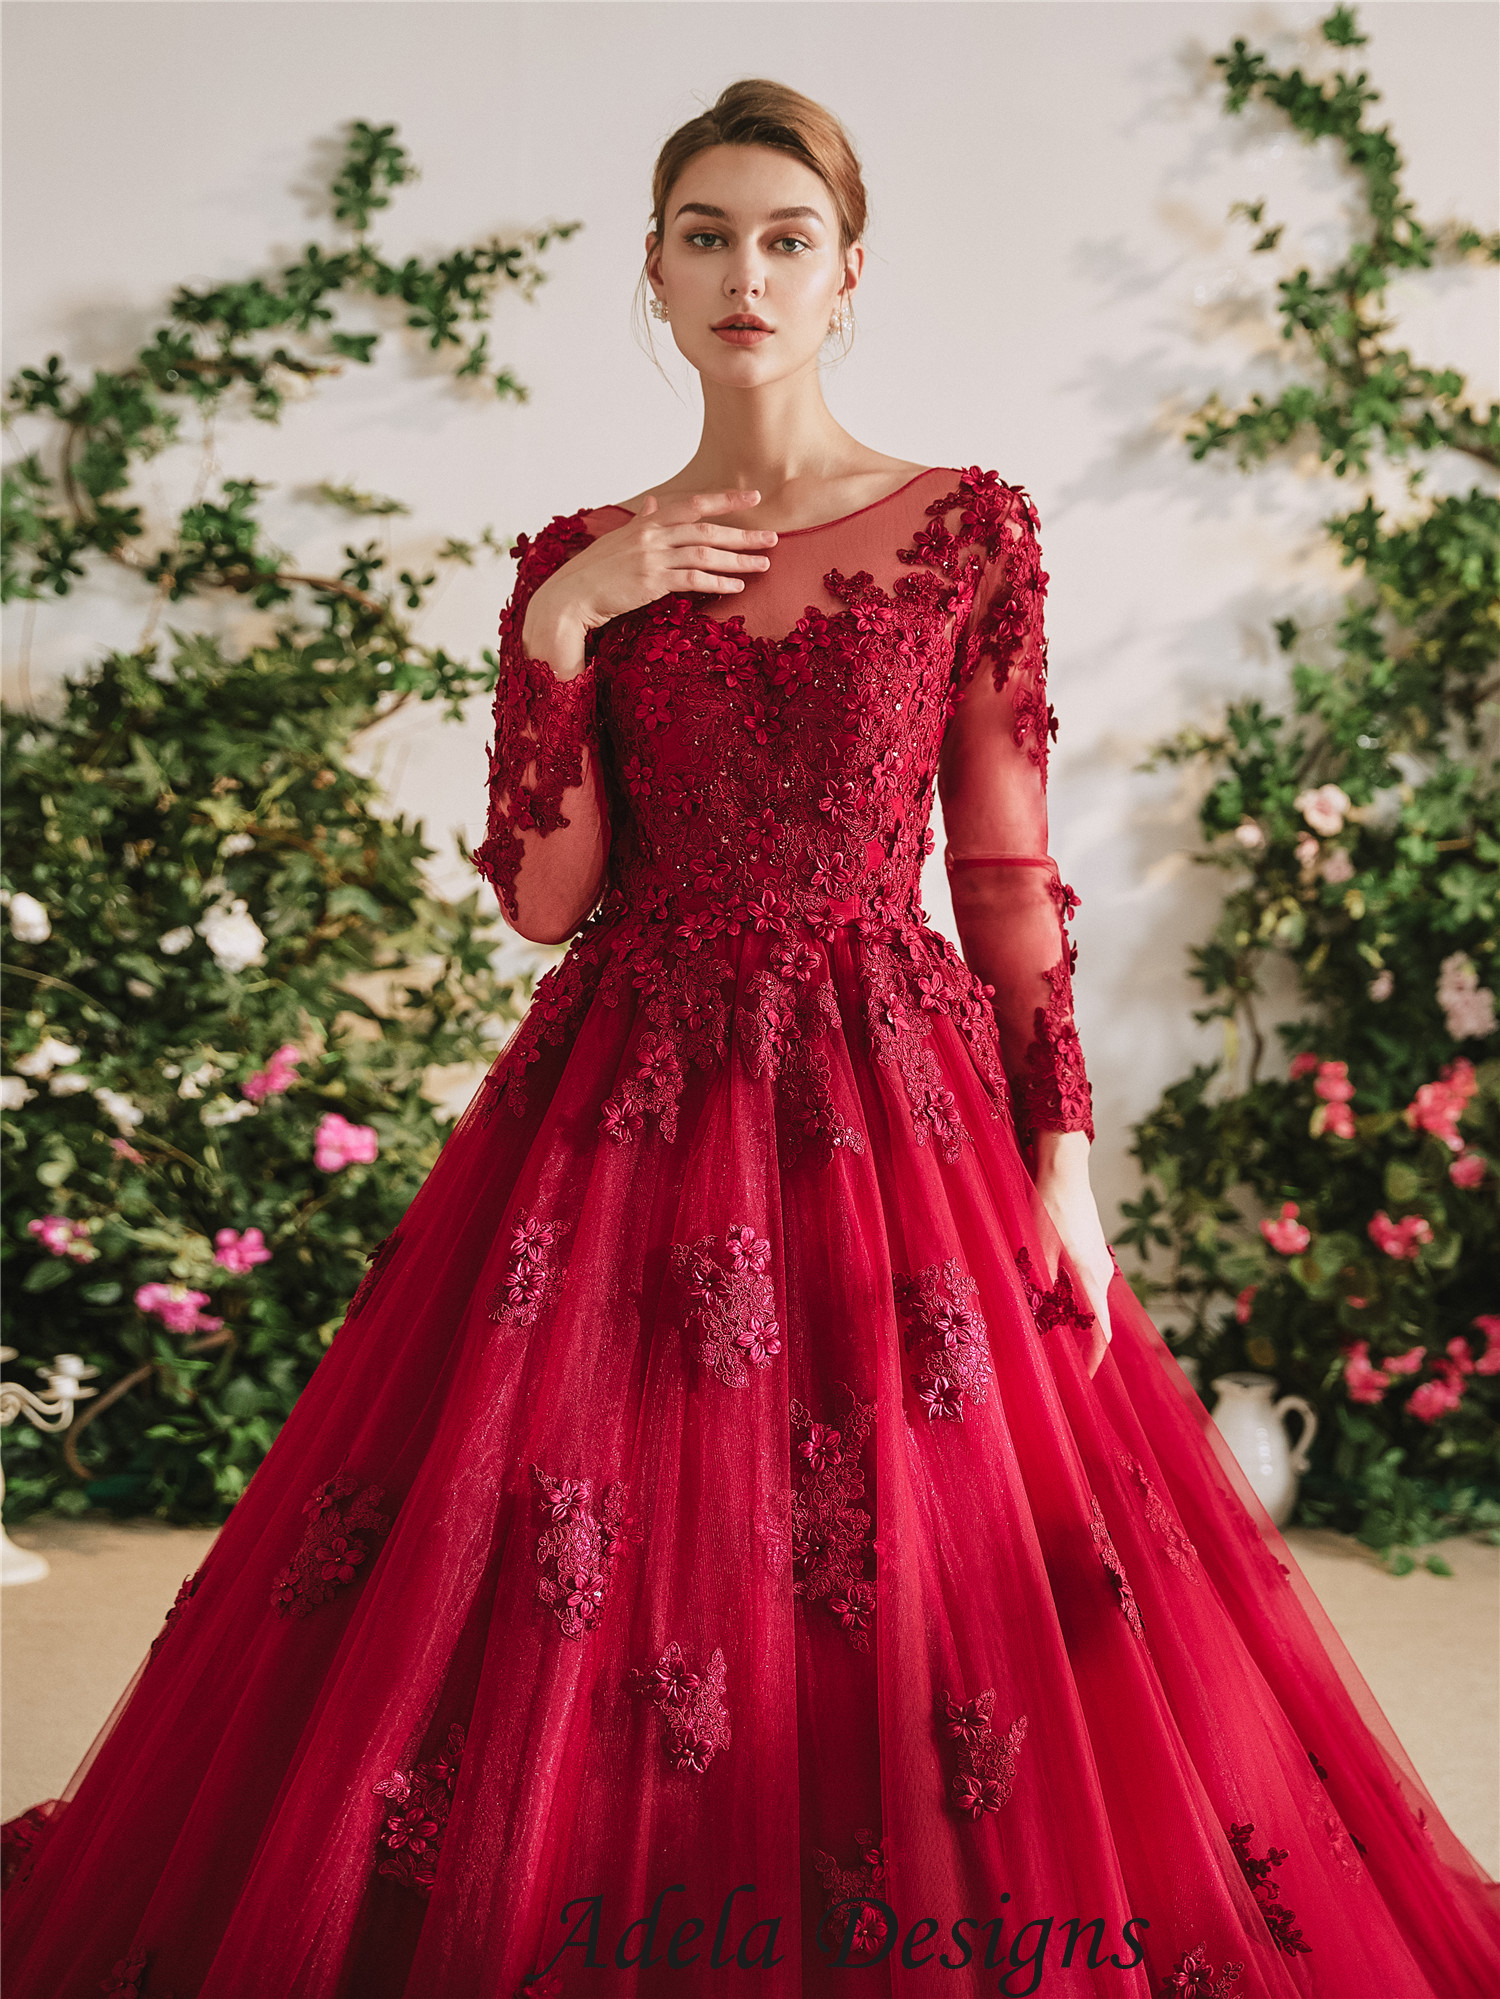 Dark Red Ball Gown Colorful Wedding Dress – Adela Designs